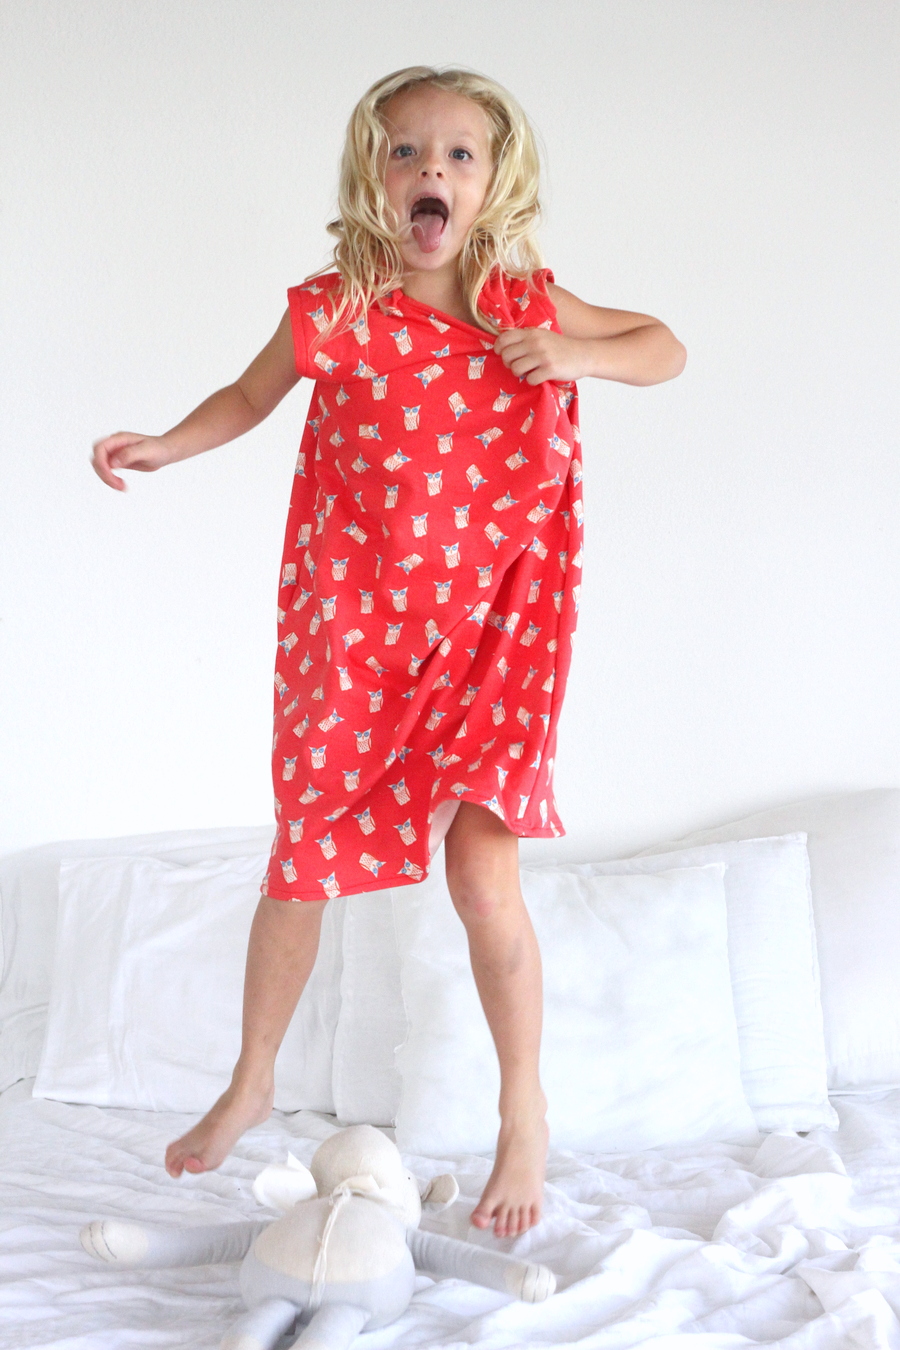 how to make the easiest ever nightgown